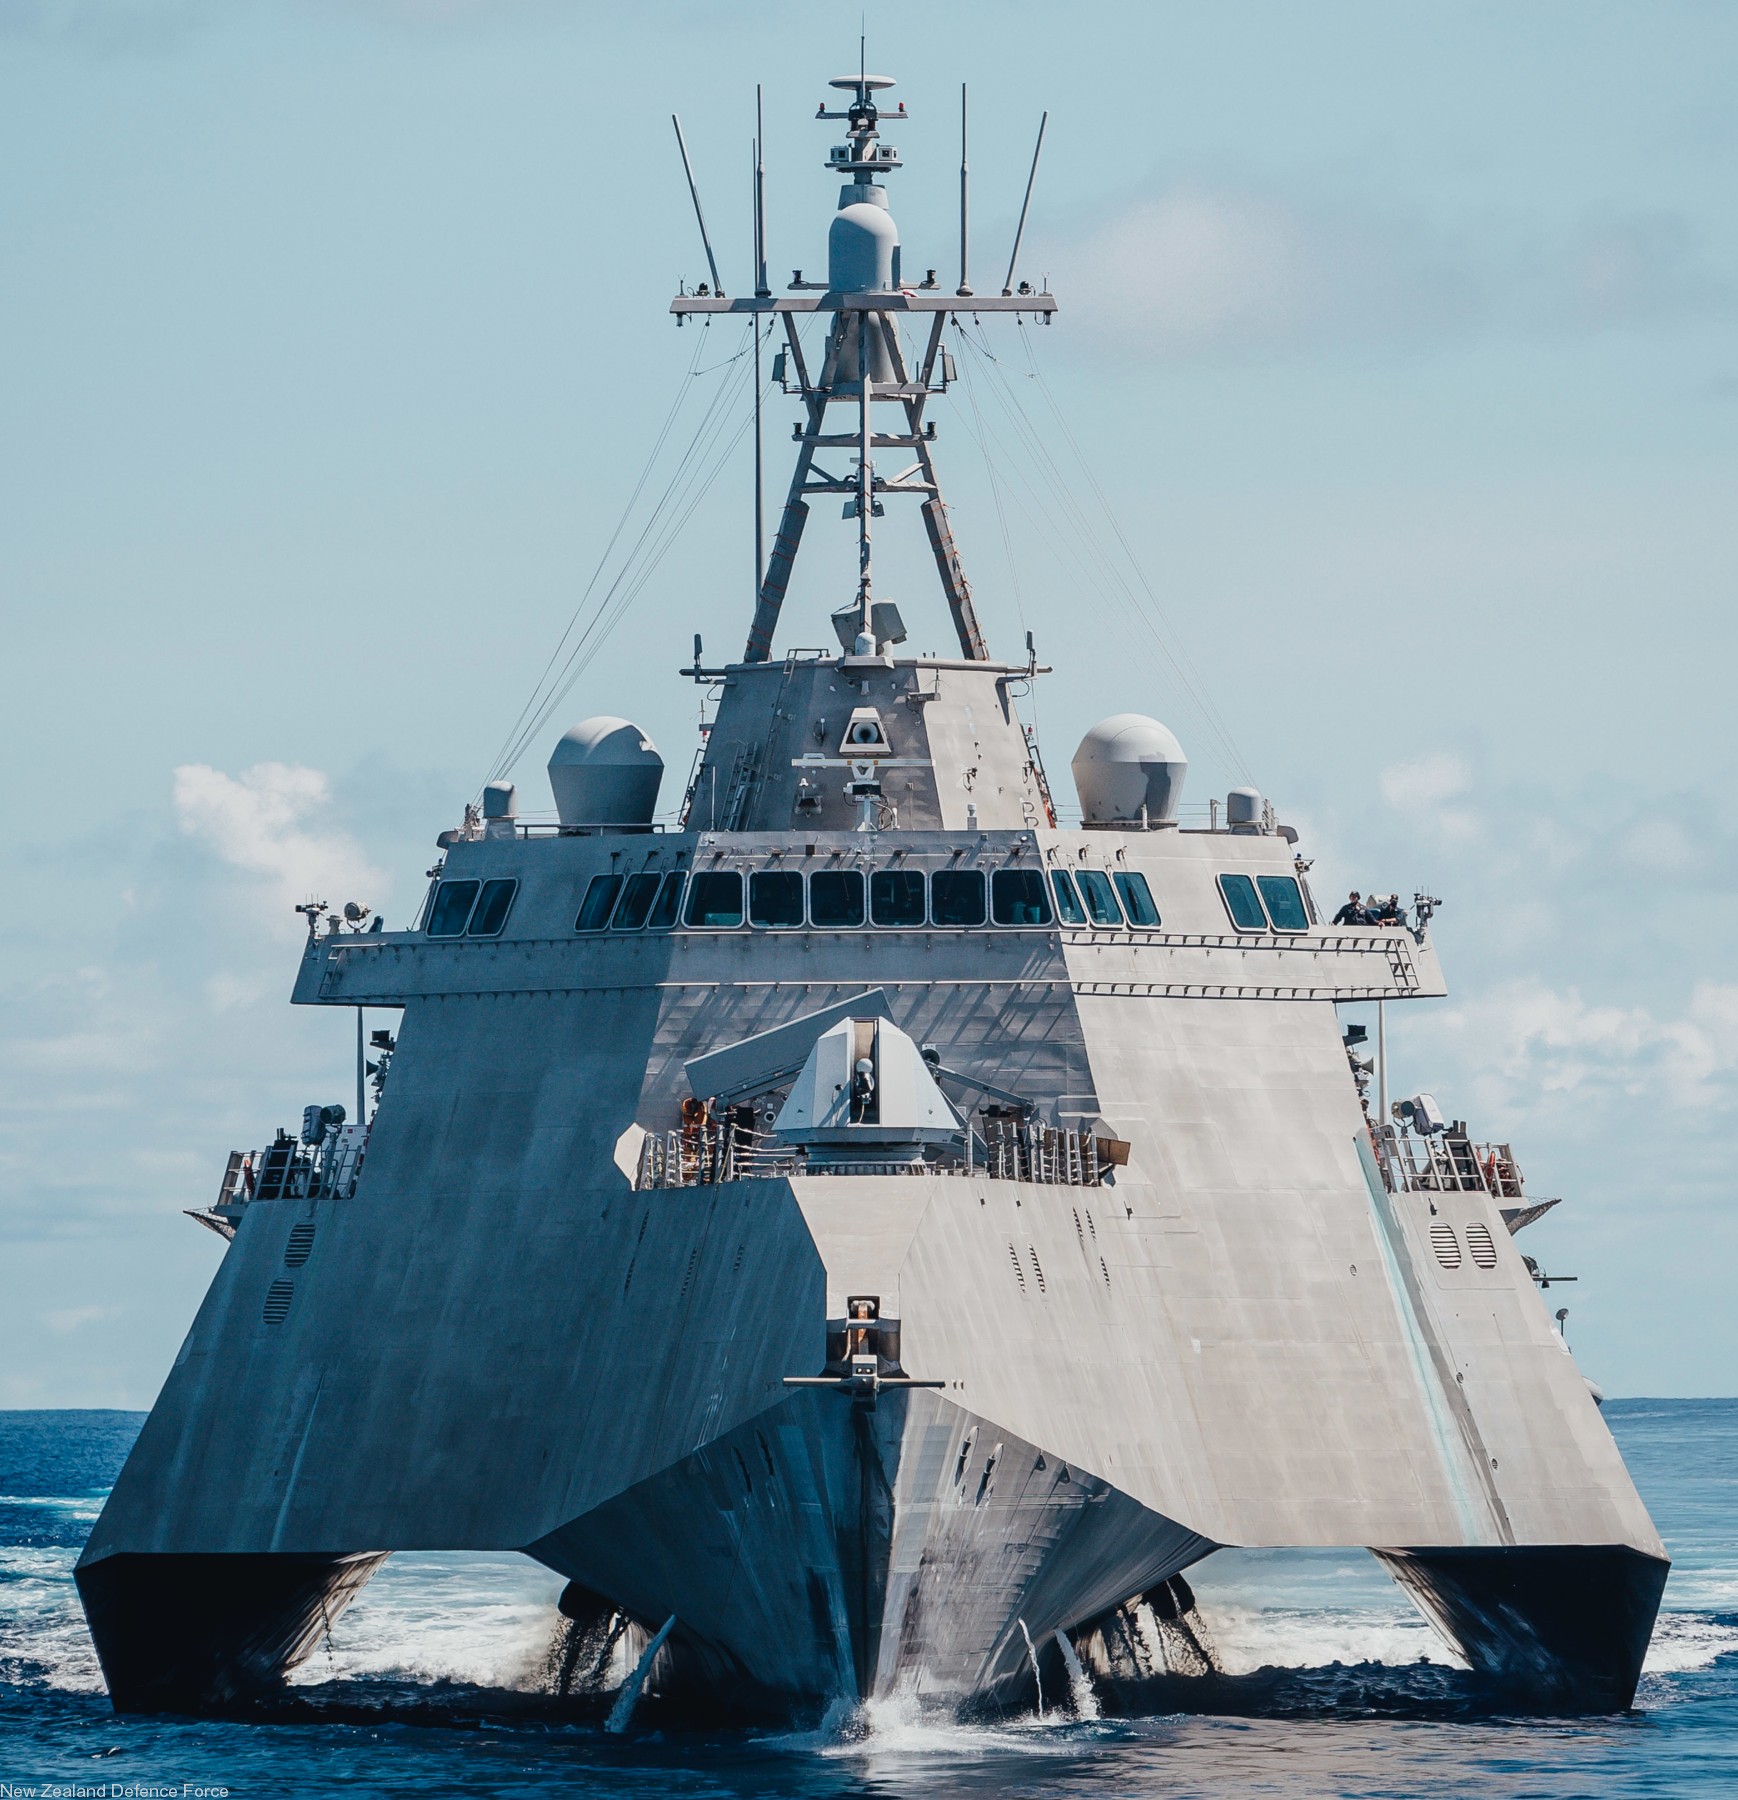 lcs-18 uss charleston independence class littoral combat ship us navy 40